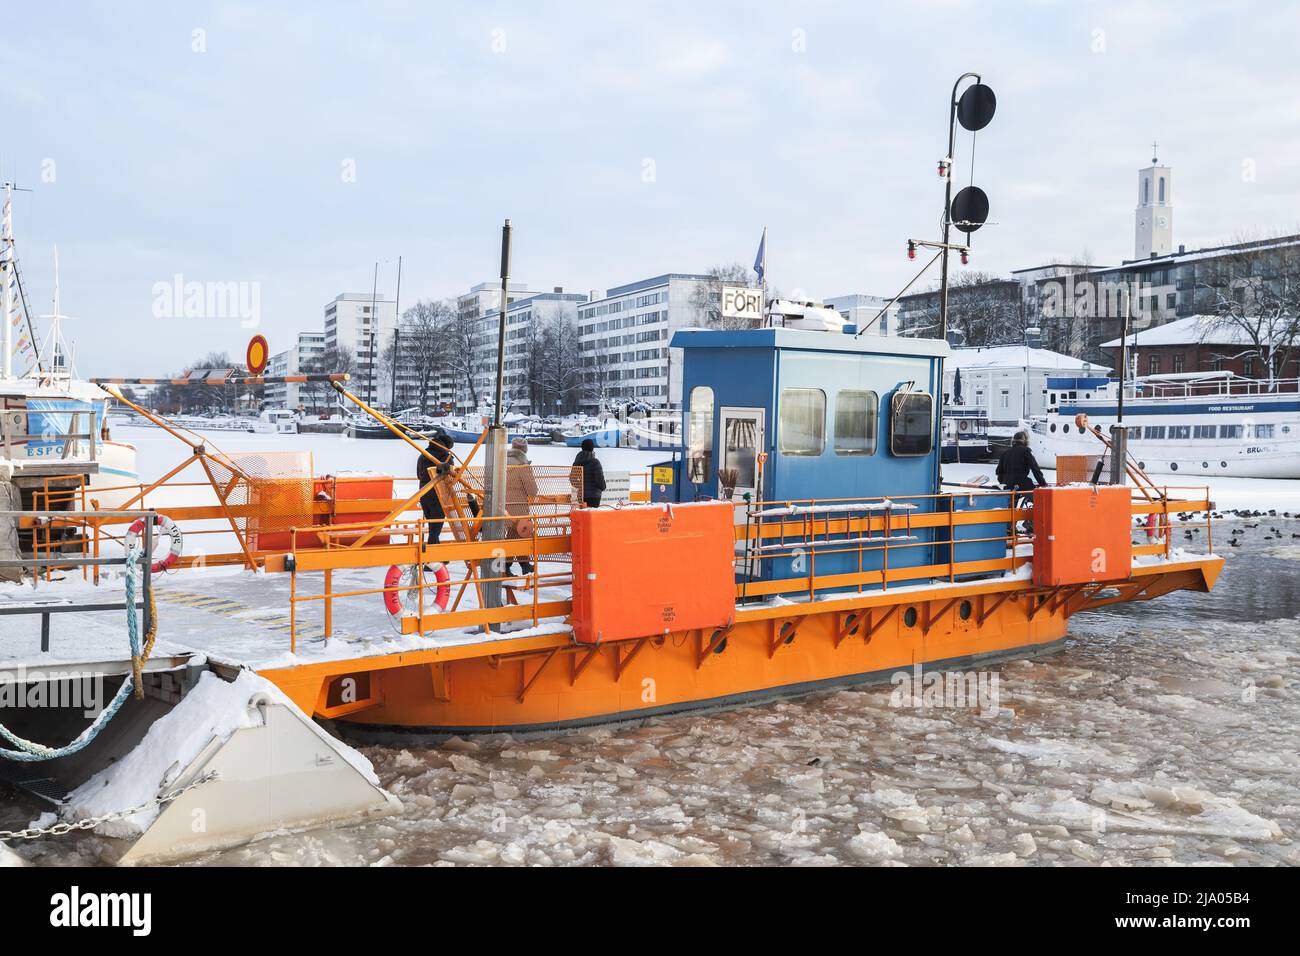 Turku, Finland - January 22, 2016: Passengers are on small city boat Fori, this is a light traffic ferry that has served the Aura River for over a hun Stock Photo